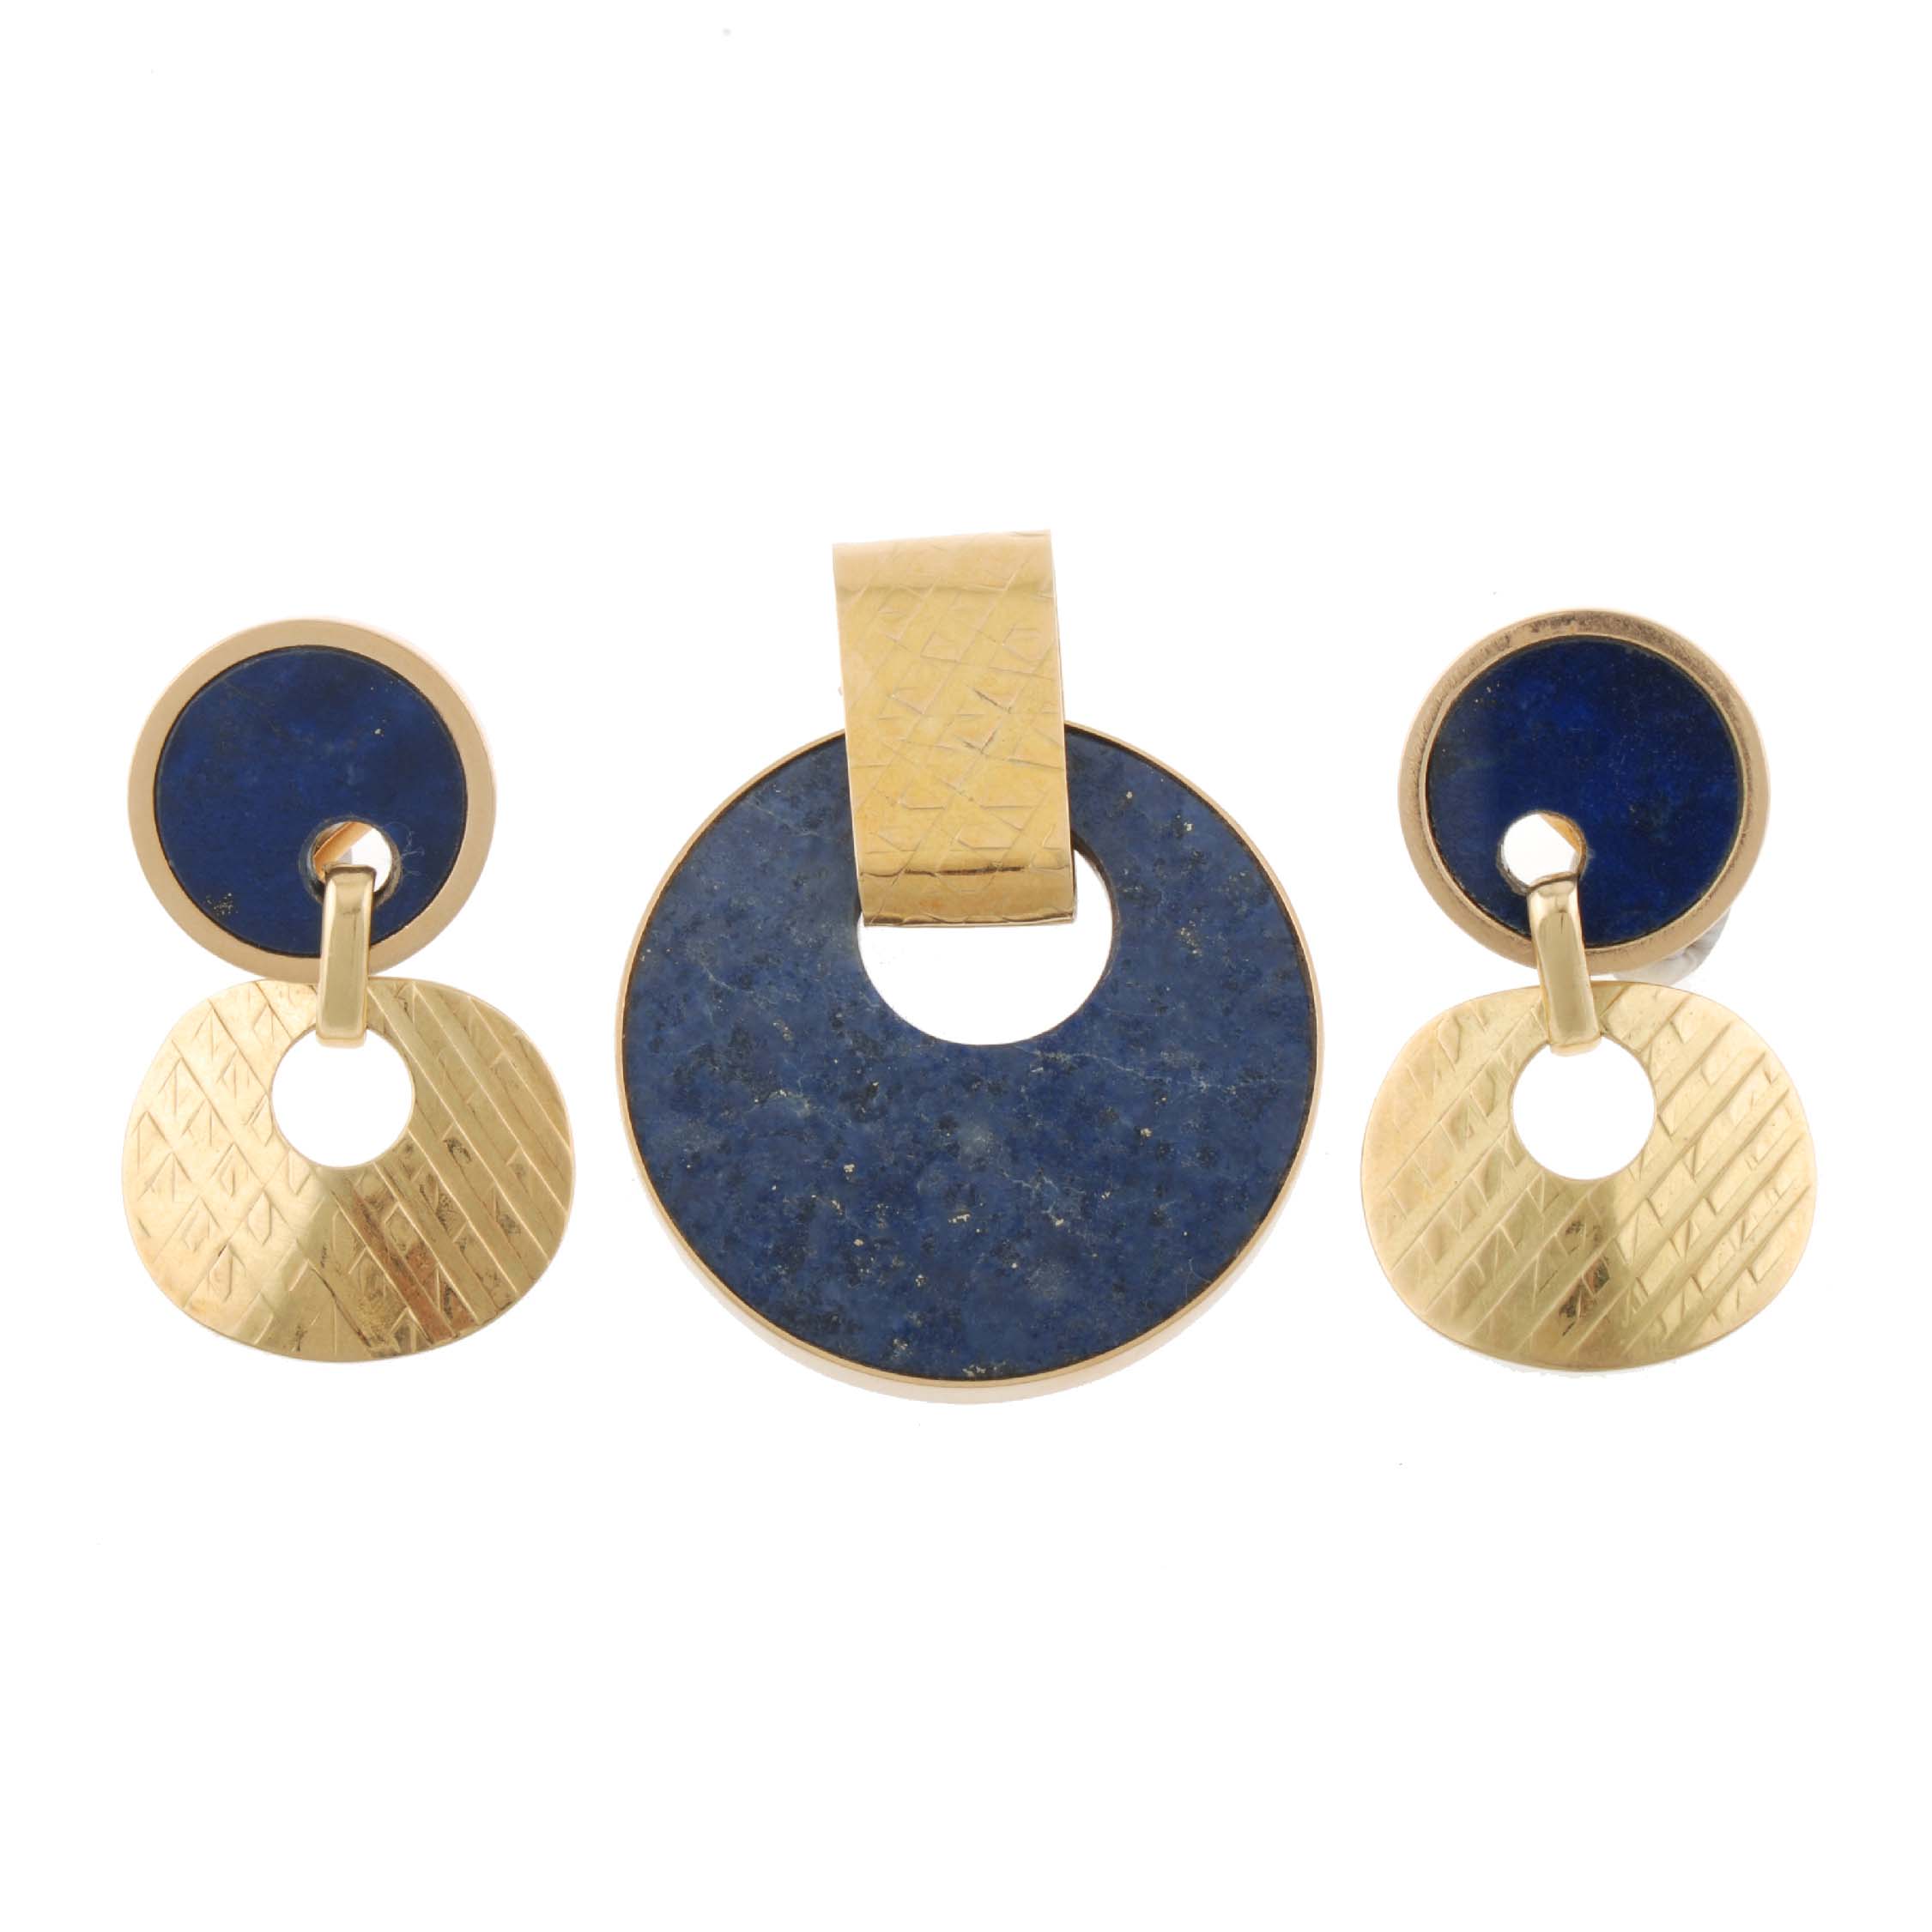 PENDANT AND EARRINGS SET, 20TH CENTURY.